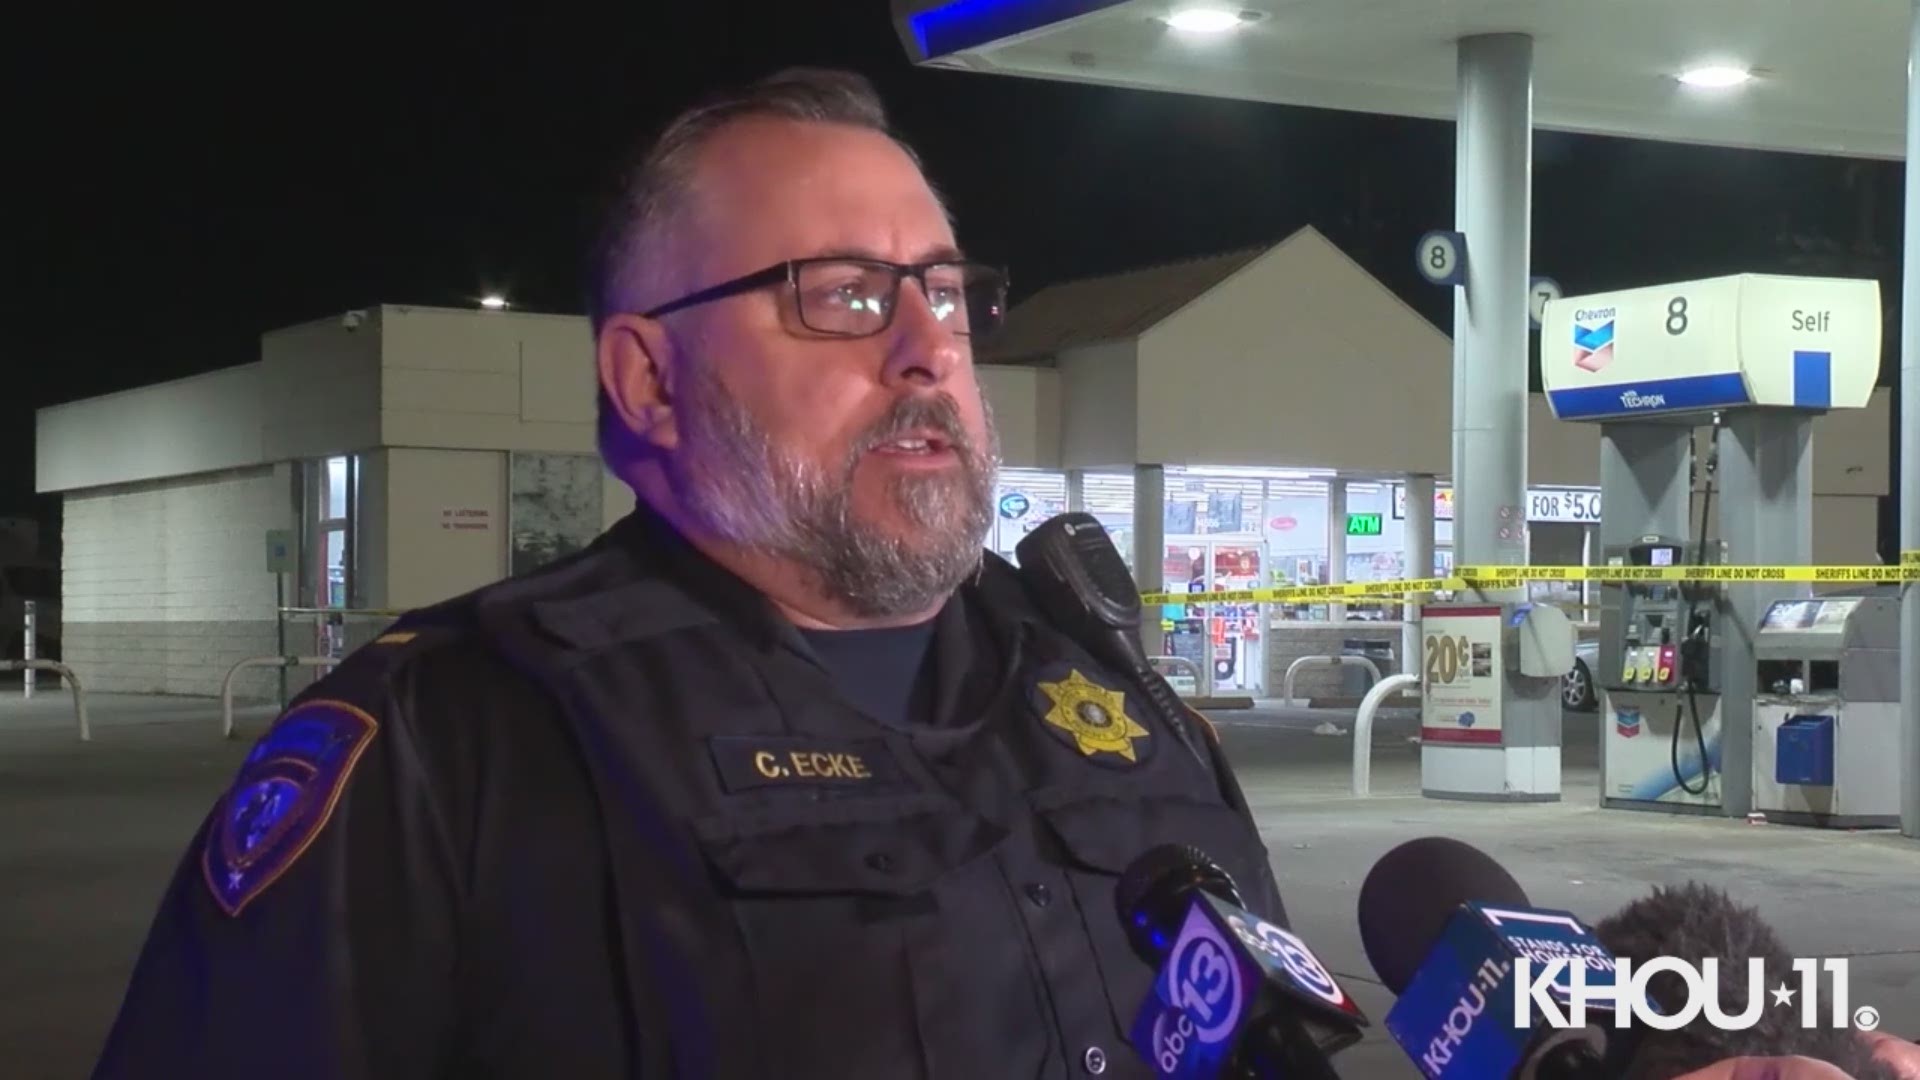 Deputies are investigating the circumstances of a shooting after three women pulled into a gas station and said they had been wounded following an altercation.